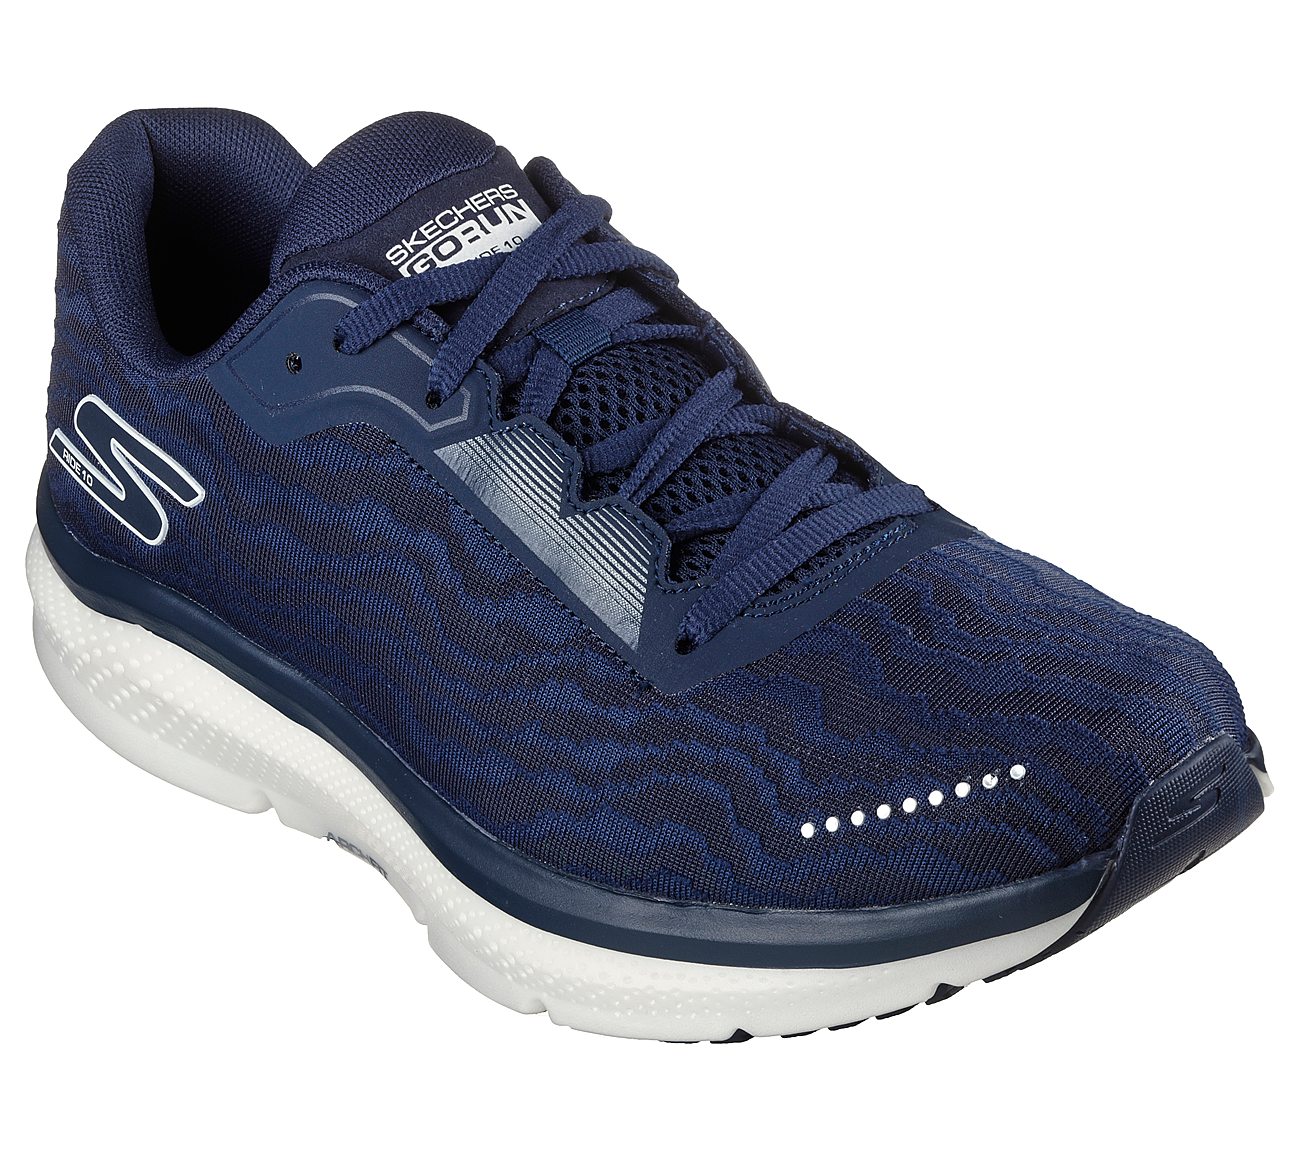 GO RUN RIDE 10, NAVY/WHITE Footwear Right View